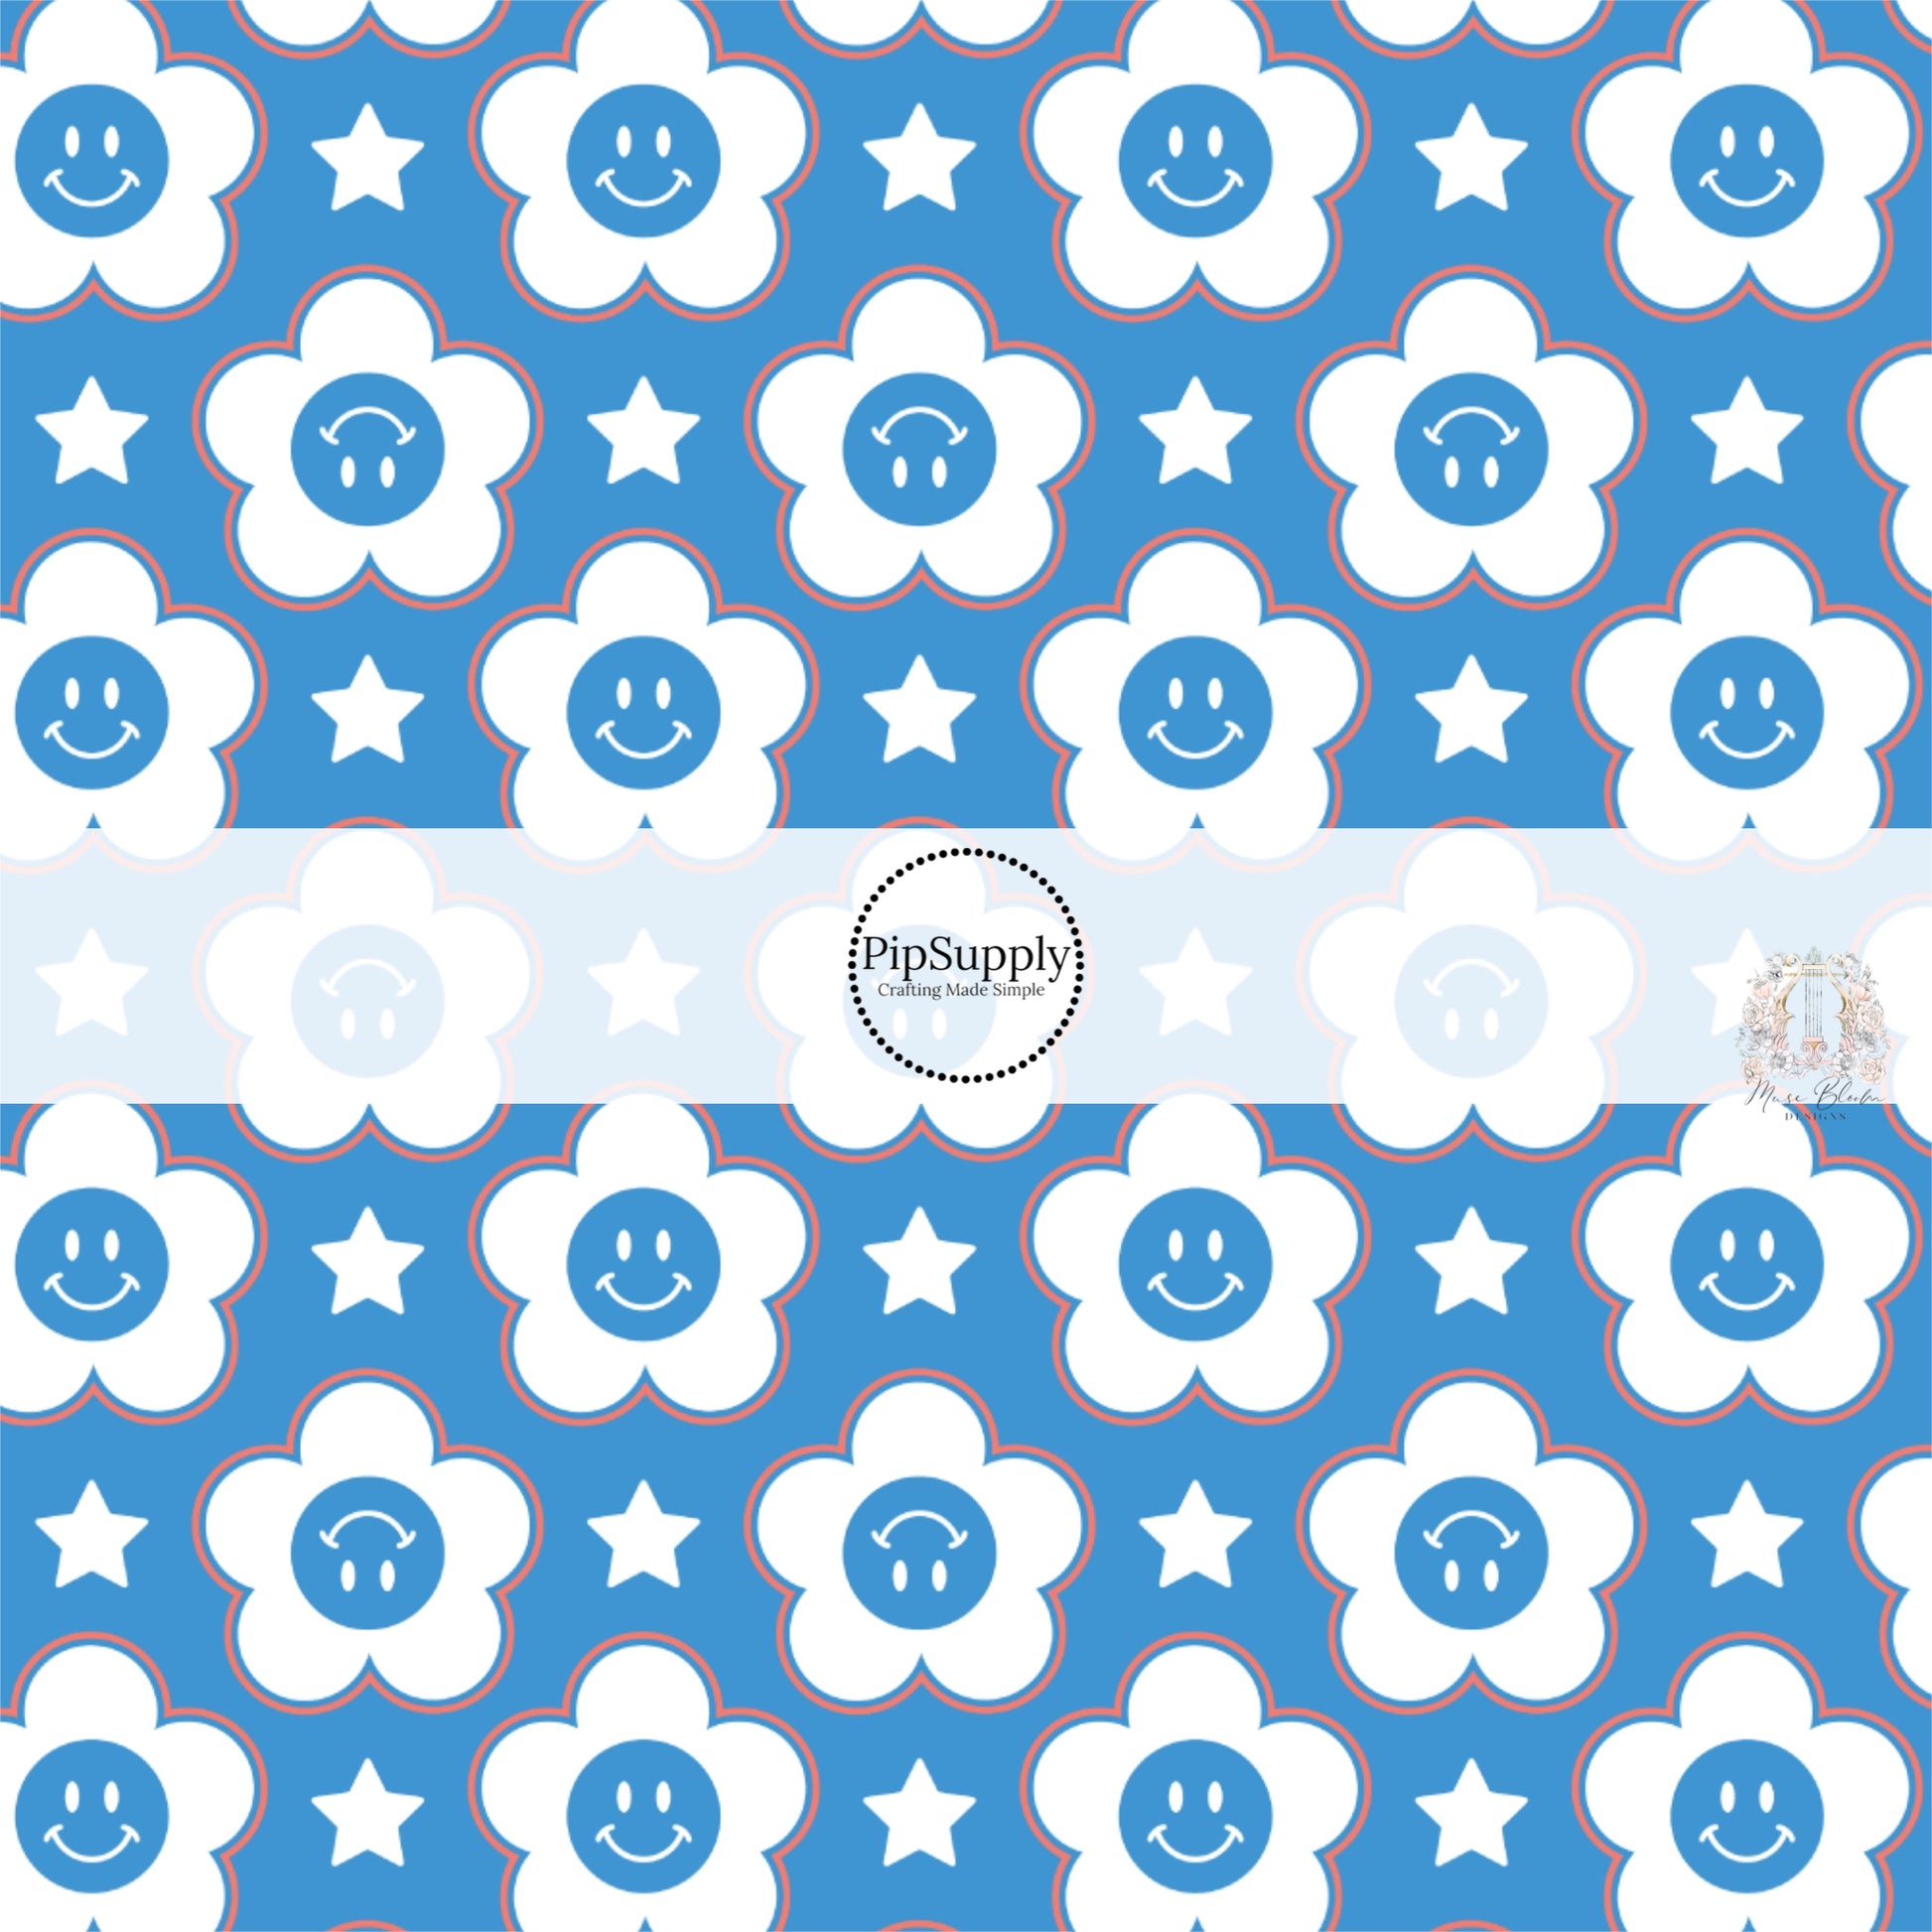 Outlined white flowers with blue smiley face and white stars on blue bow strips